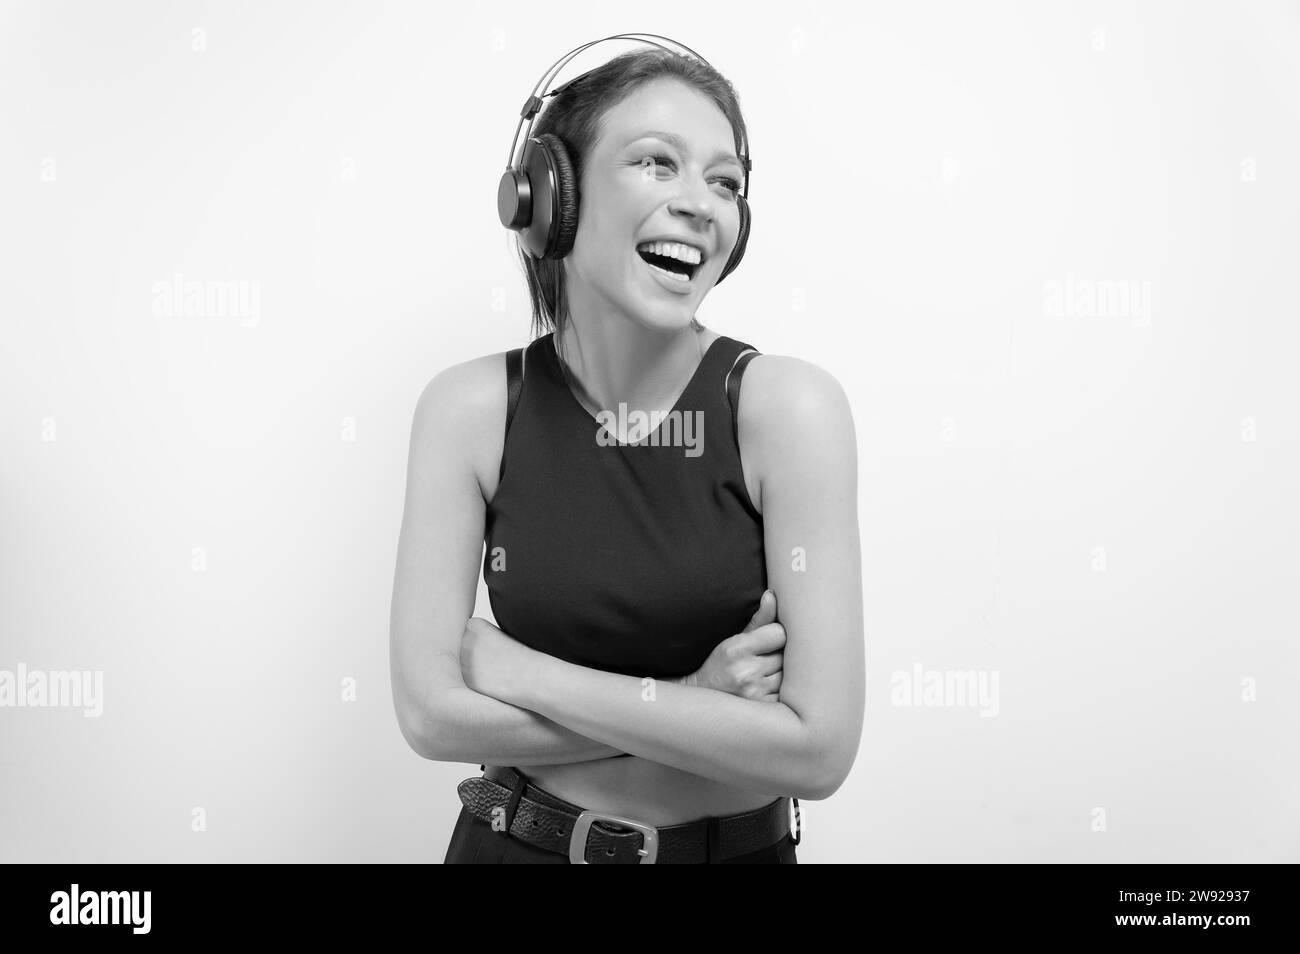 Portrait of a laughing woman in headphones. Musical accessories concept. Mixed media Stock Photo